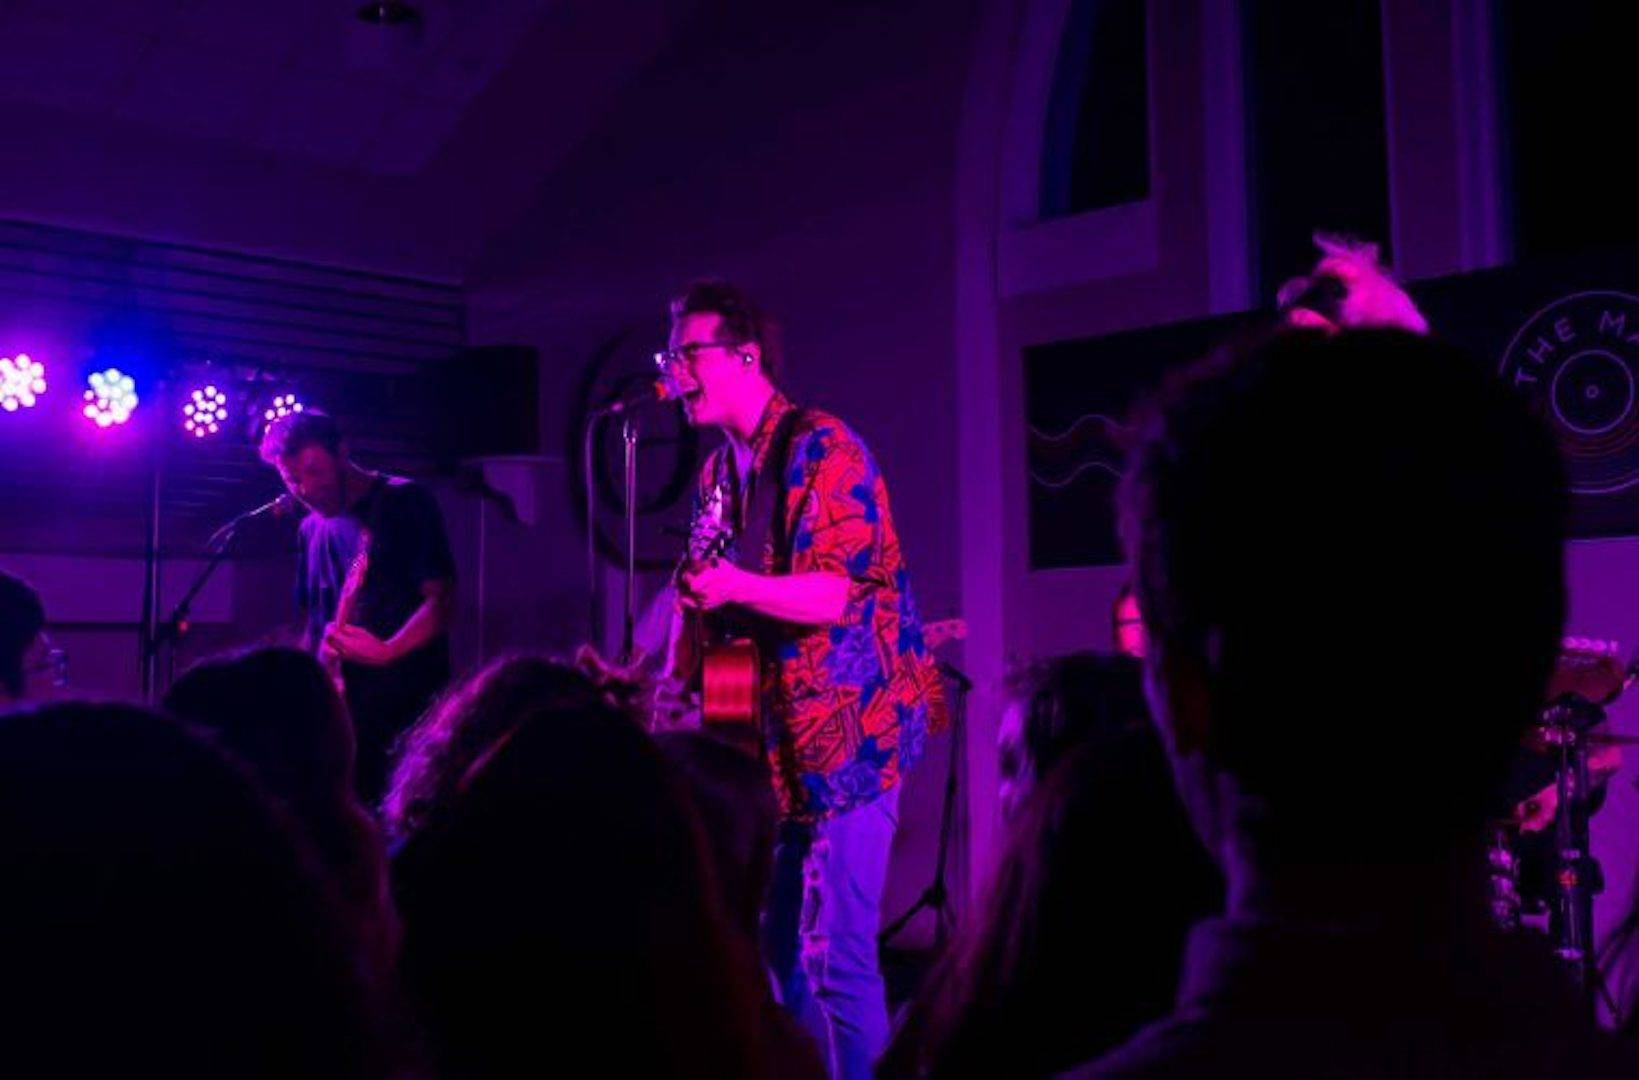 Male singer sings into mic during an intimate, darkly lit pop-rock performance